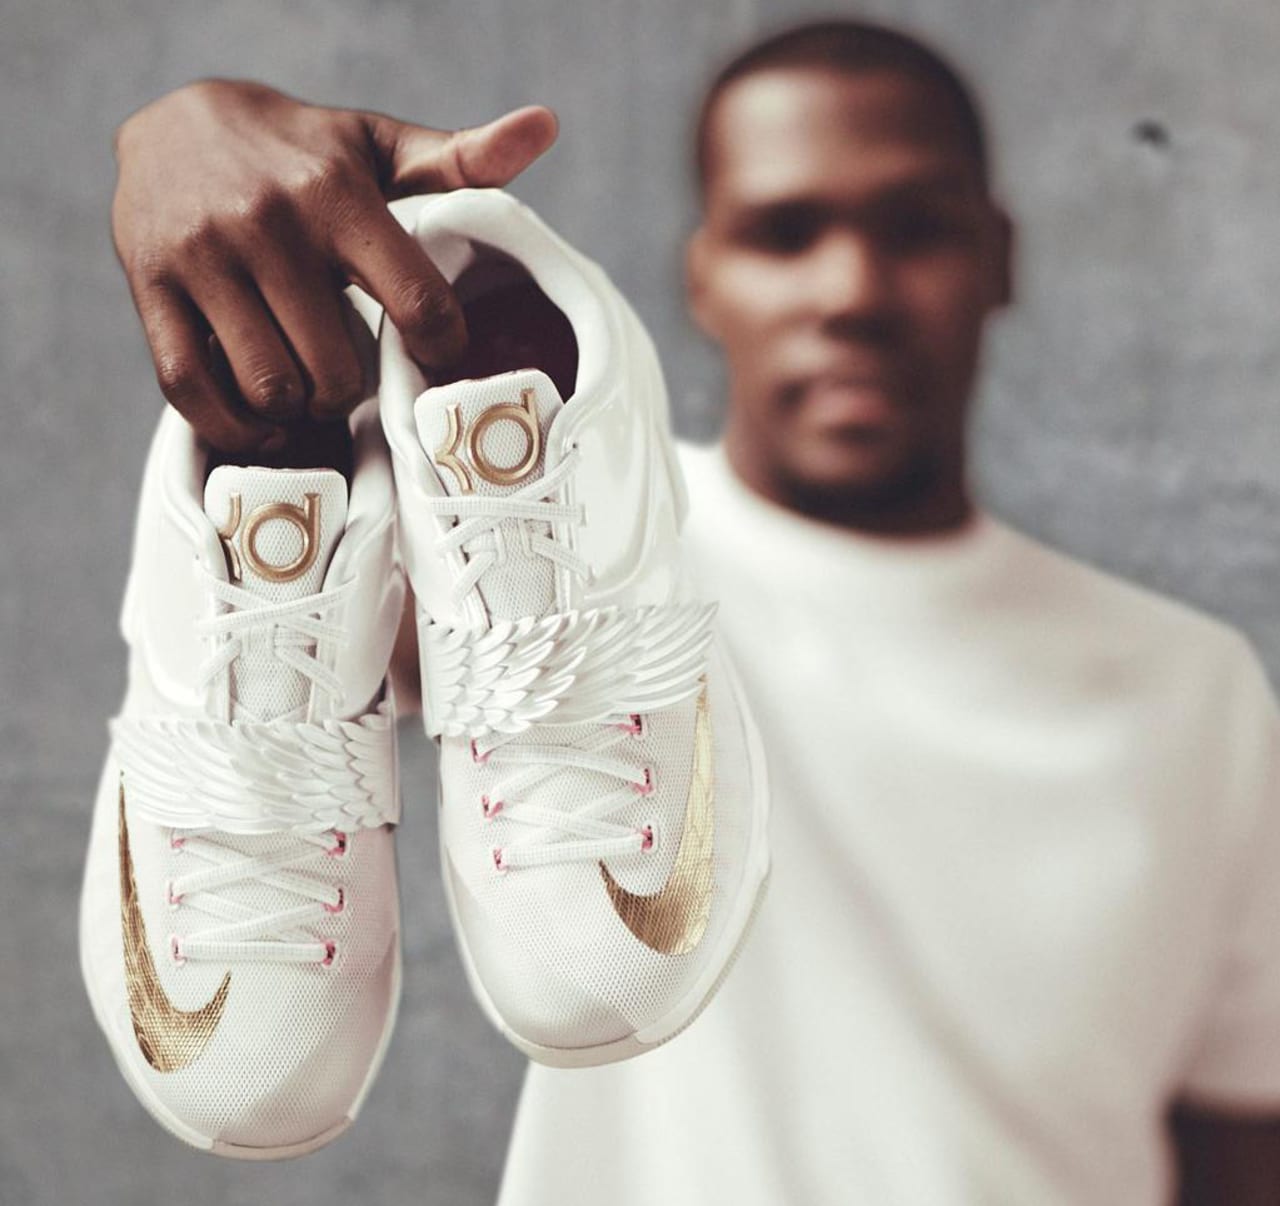 kevin durant aunt pearl shoes 2019